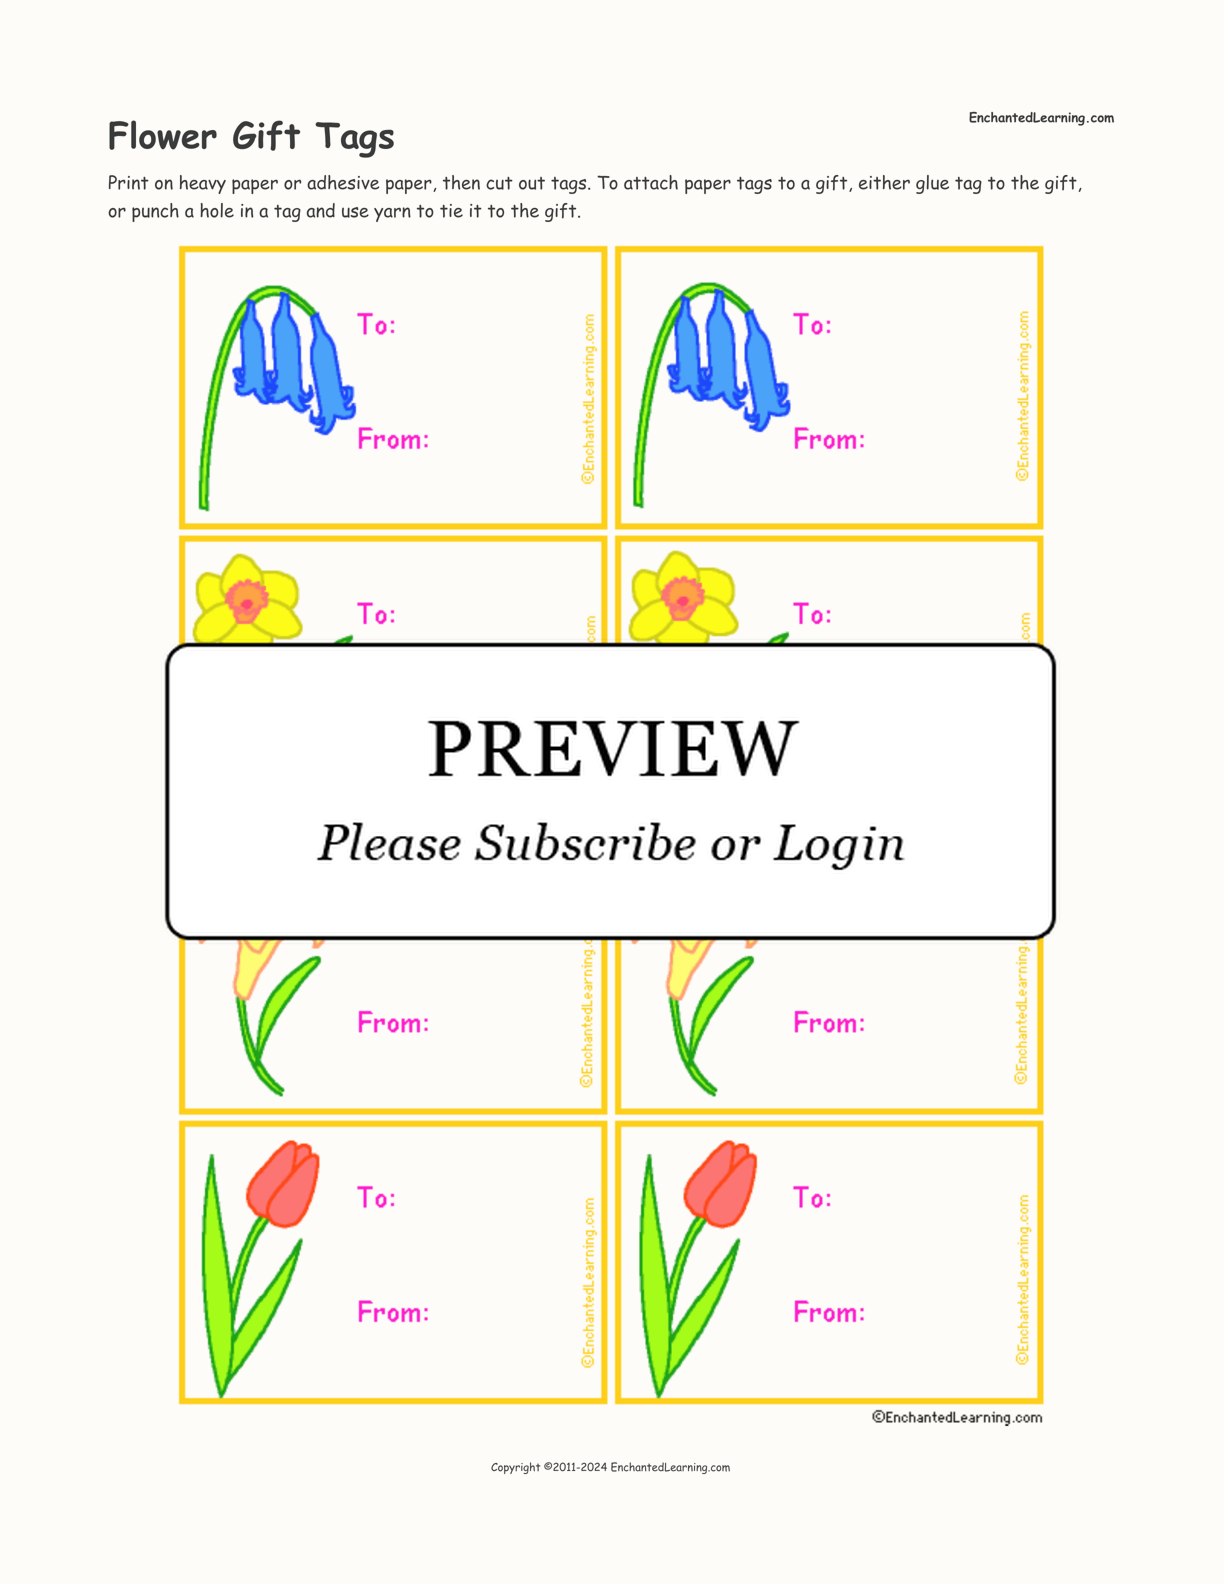 Flower Gift Tags interactive printout page 1